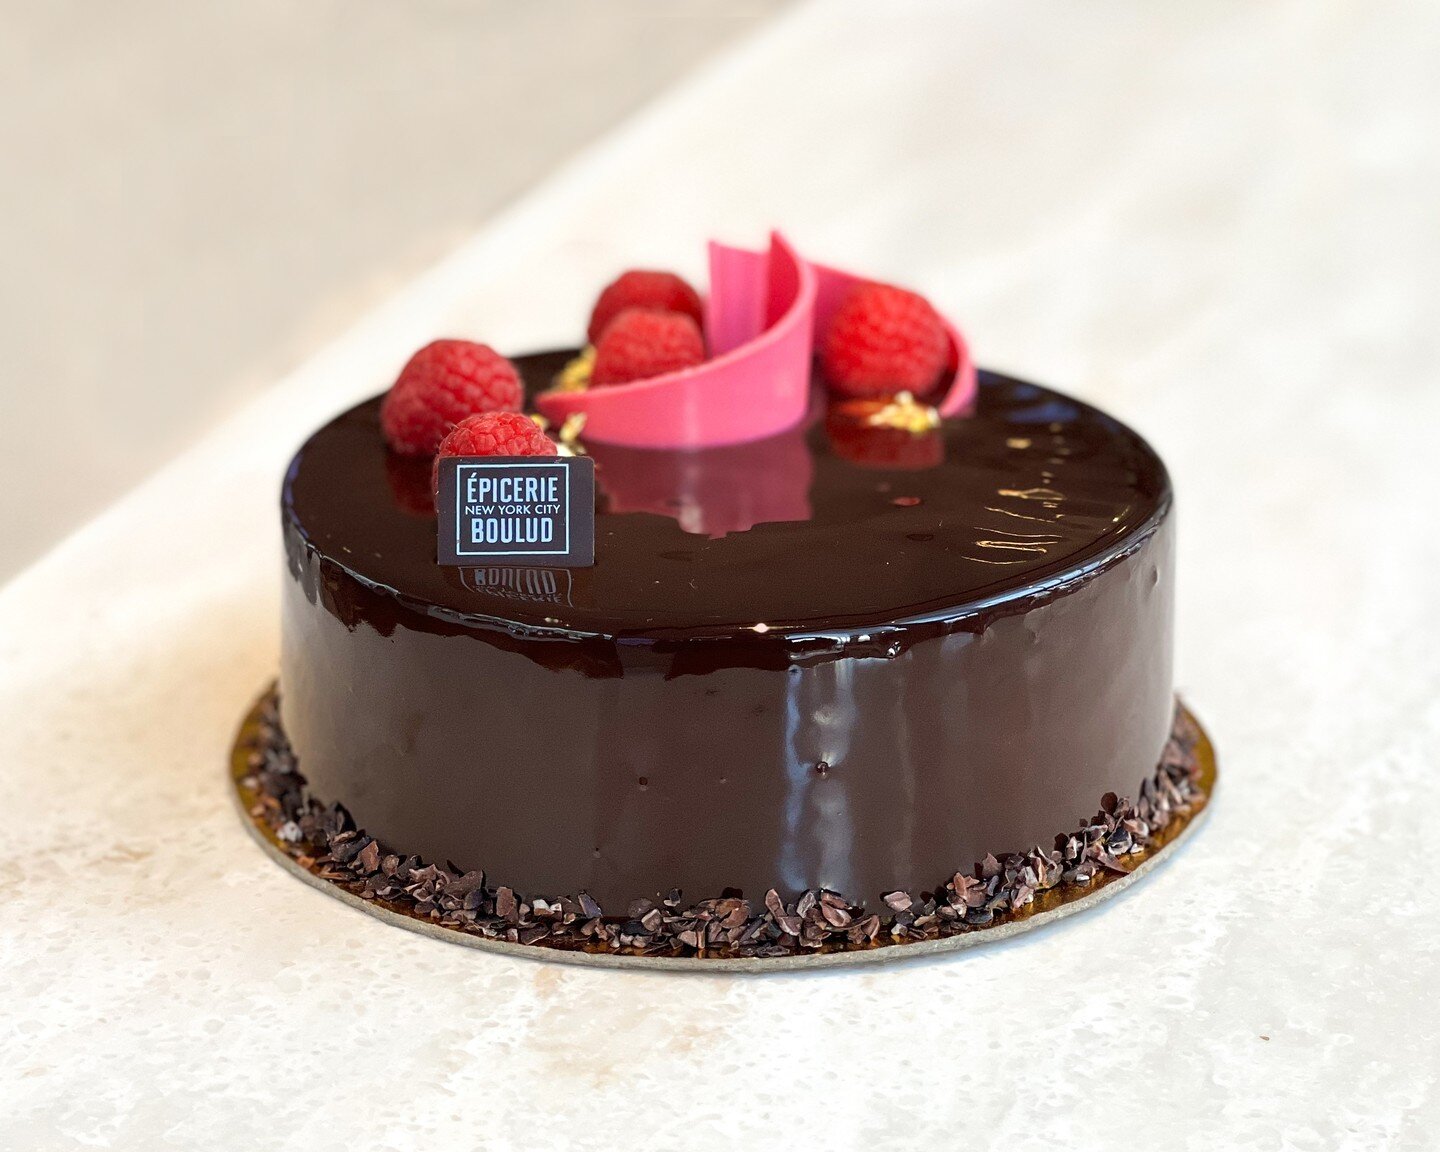 In need of a midweek pick-me-up? We recommend &Eacute;picerie&rsquo;s Flourless Chocolate Cake.